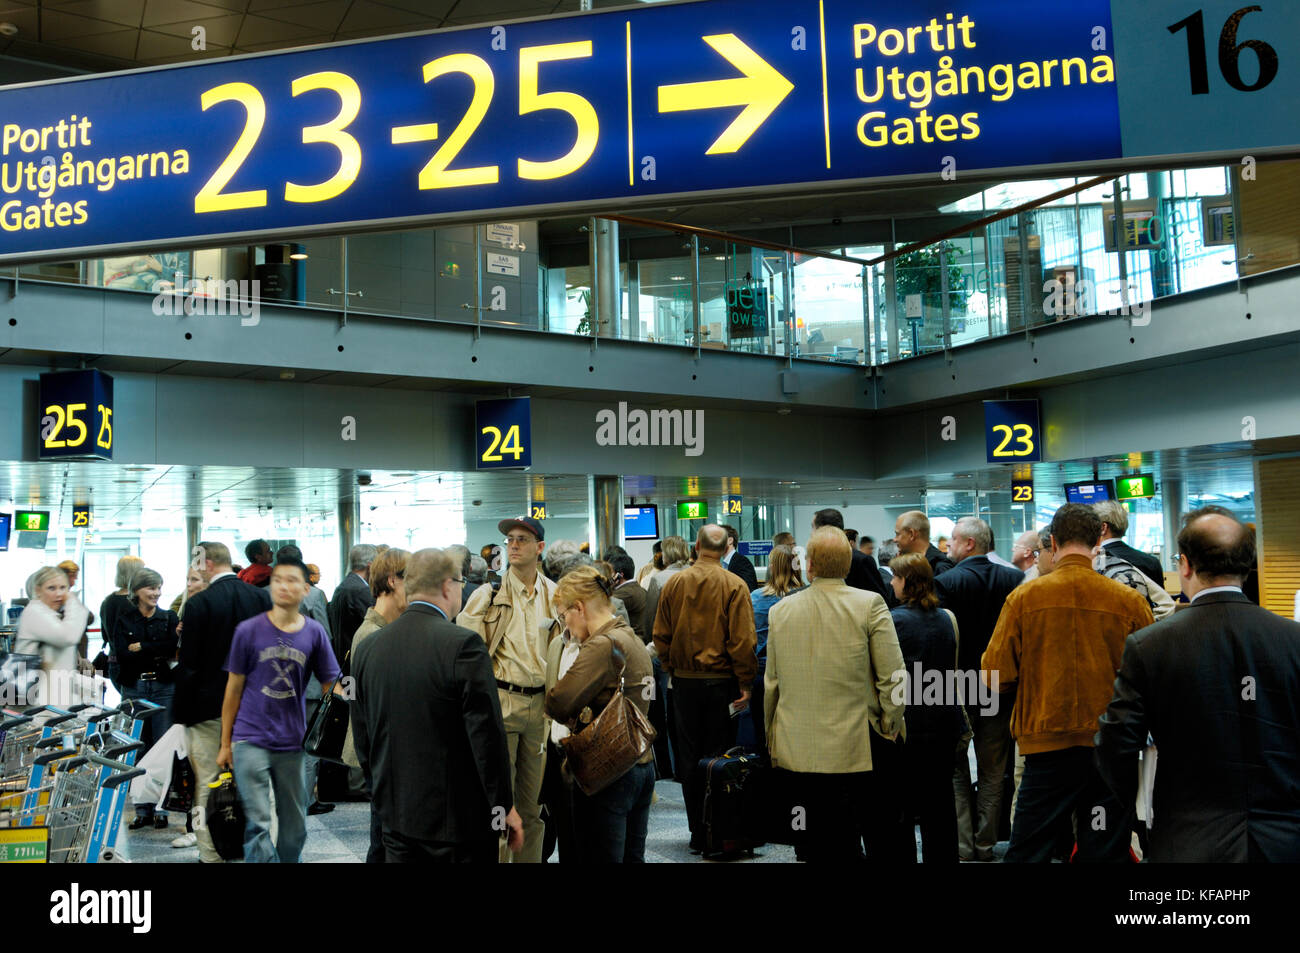 passengers with bags under sign for Gates 23 to 25 in Finnish, Swedish and English languages in the terminal Stock Photo